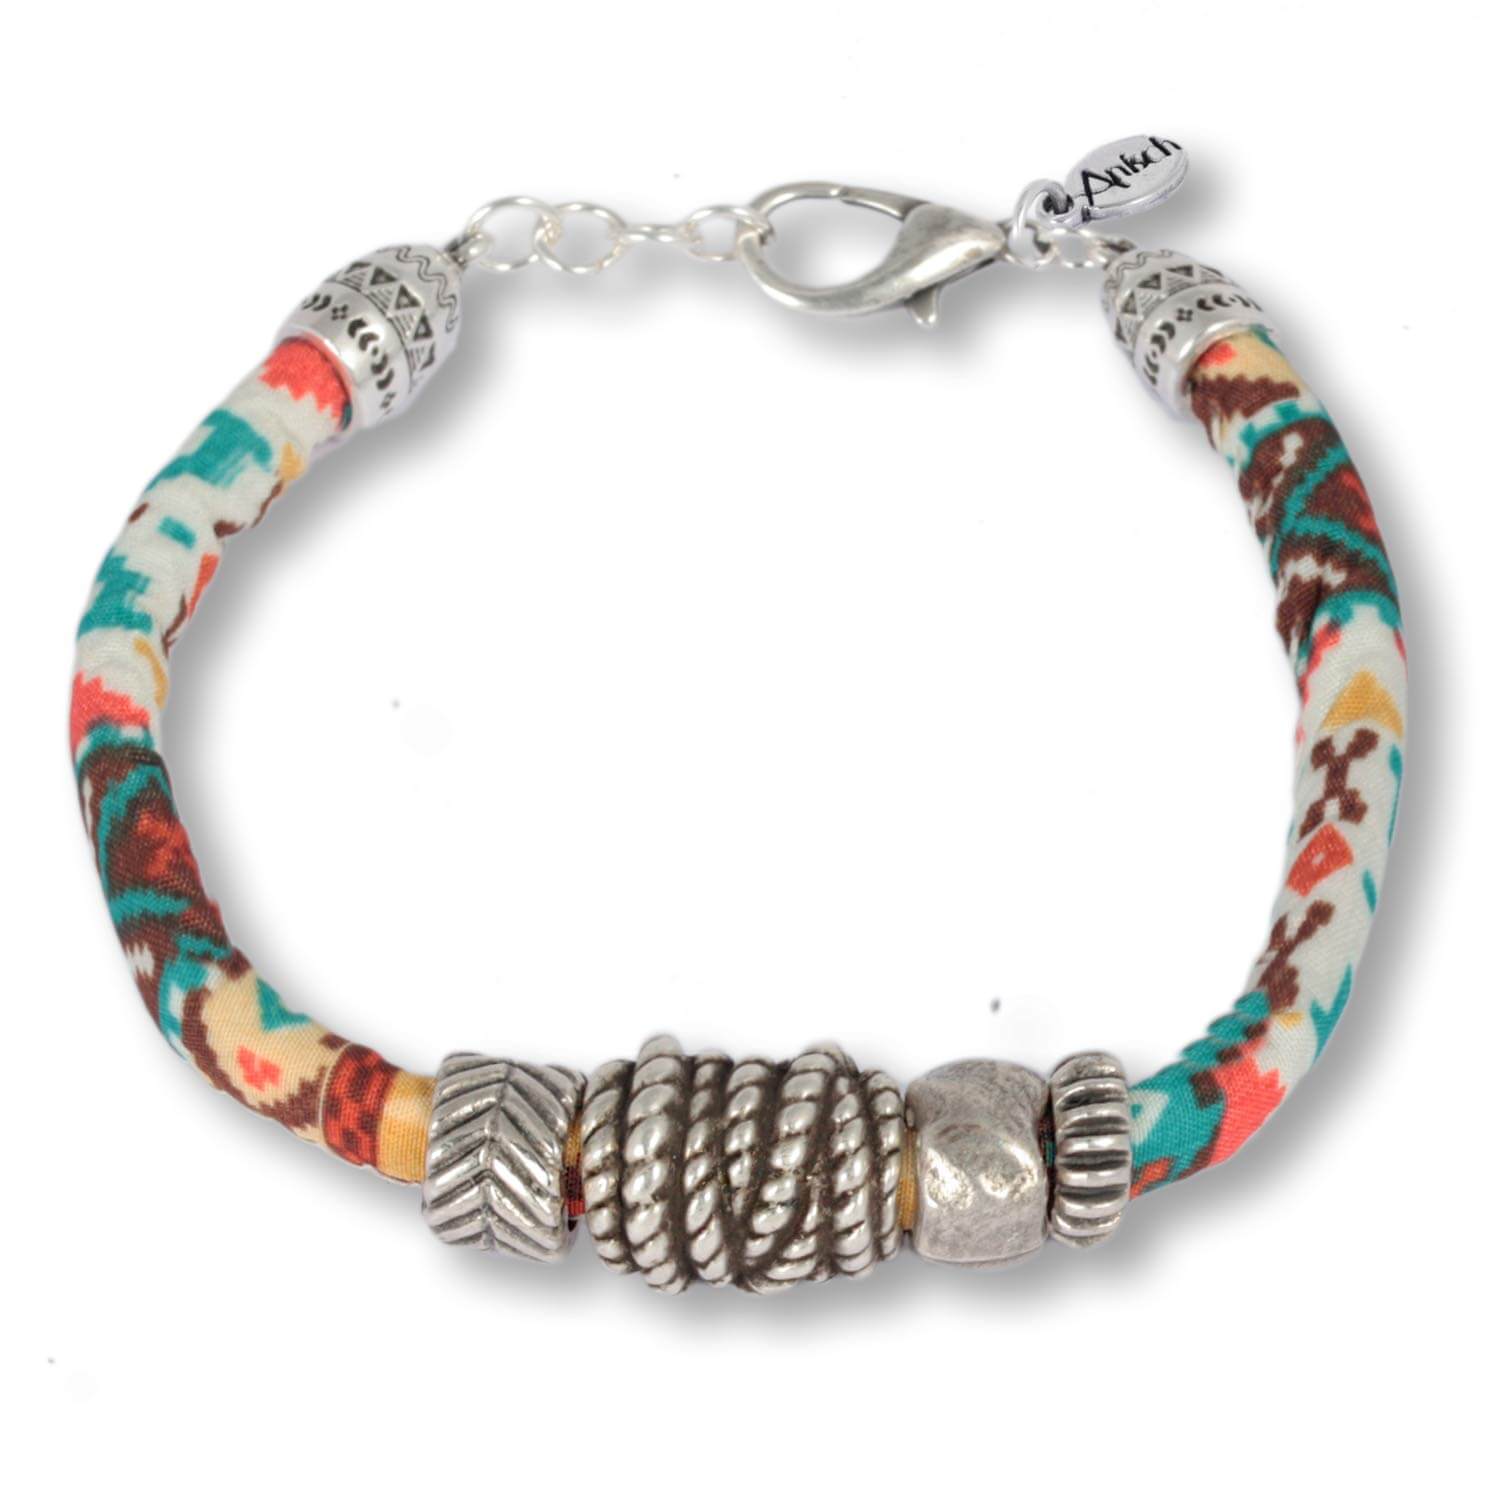 Nature Chief - Ethno bracelet with traditional patterns